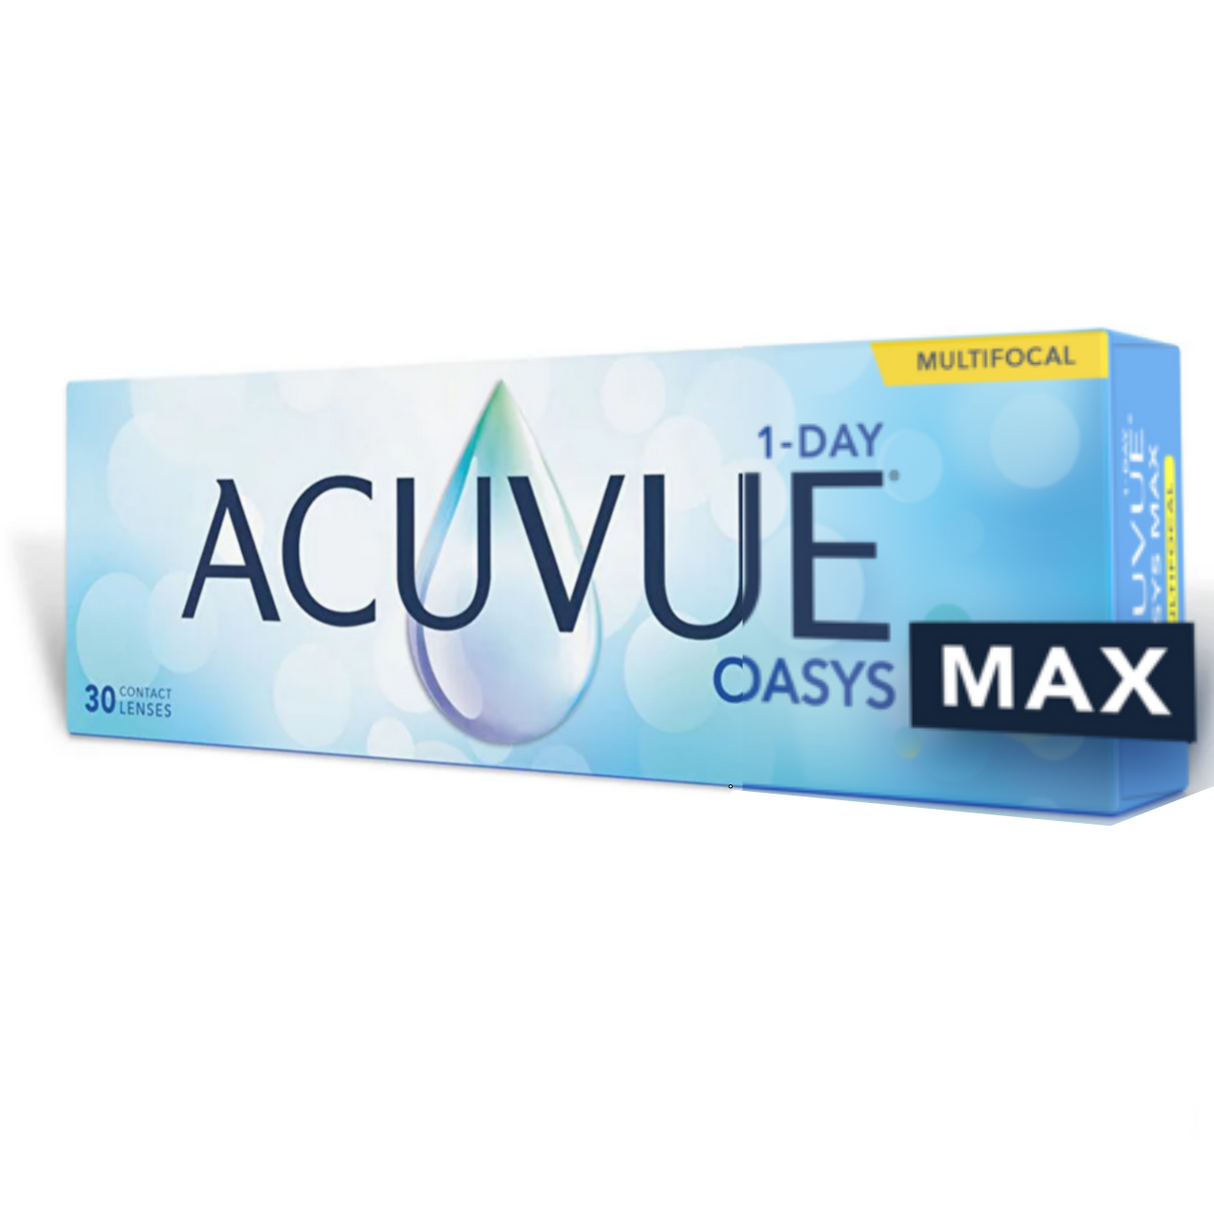 Acuvue Oasys  MAX 1-Day Multifocal 30 pk